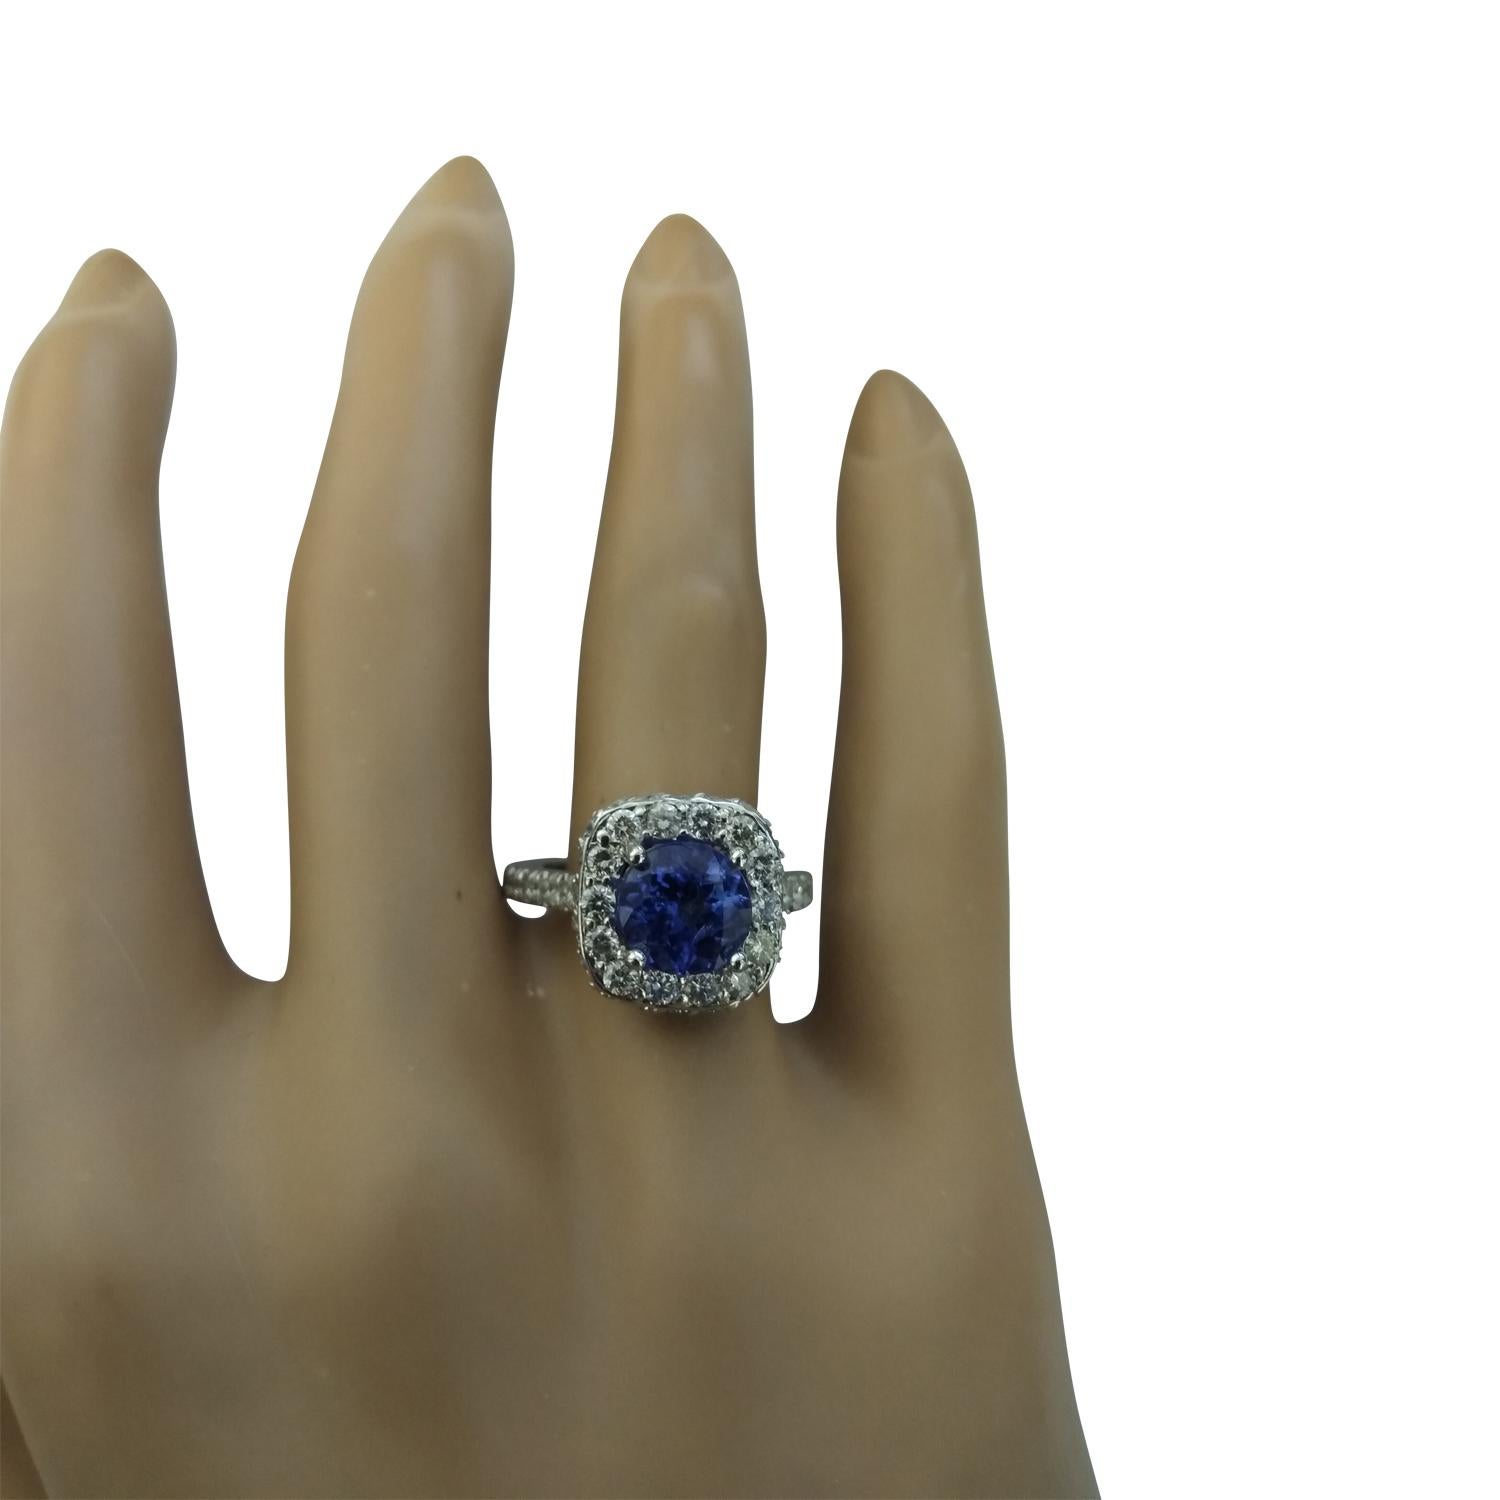 2.87 Carat Natural Tanzanite 14 Karat Solid White Gold Diamond Ring
Stamped: 14K 
Total Ring Weight: 5.7 Grams 
Tanzanite Weight 1.87 Carat (7.00x7.00 Millimeters)
Diamond Weight: 1.00 carat (F-G Color, VS2-SI1 Clarity )
Face Measures: 12.30x12.30